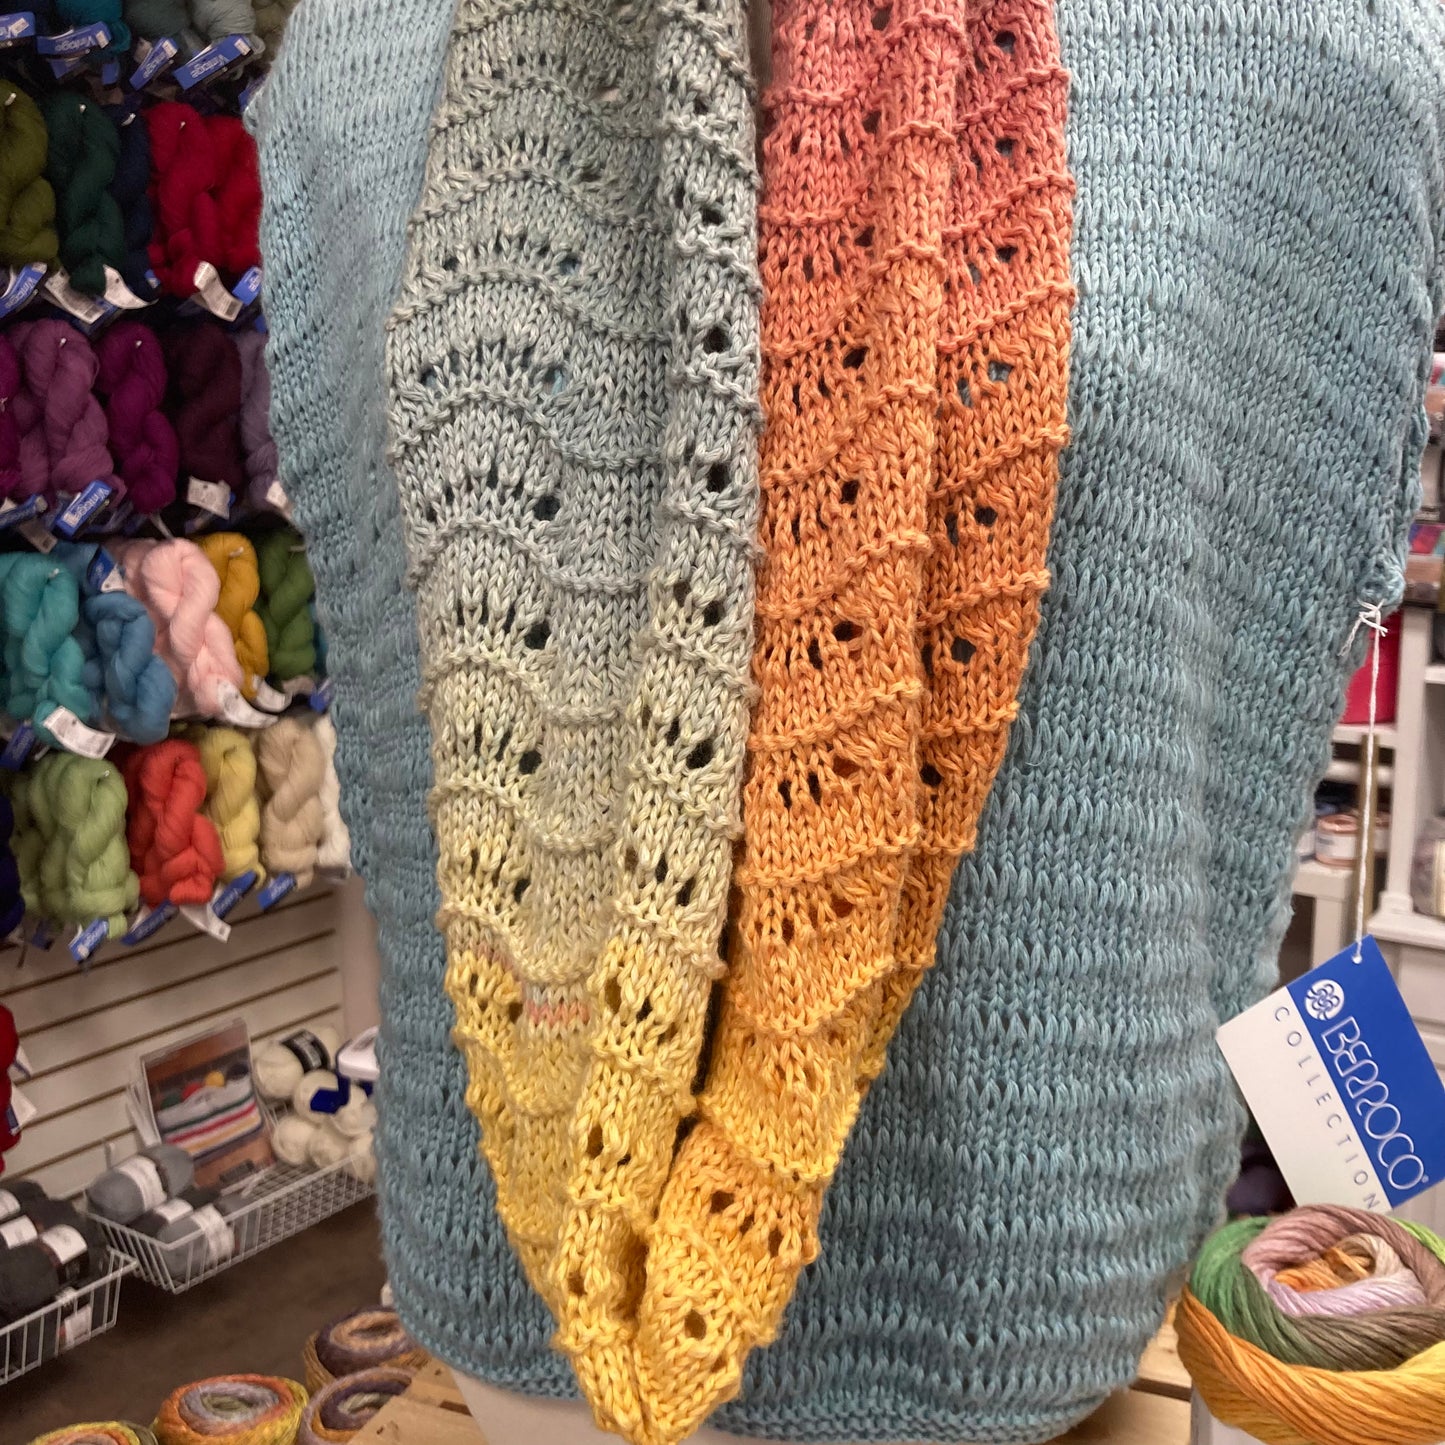 Learn to Knit a Lace Cowl! A Workshop with Carol Gee